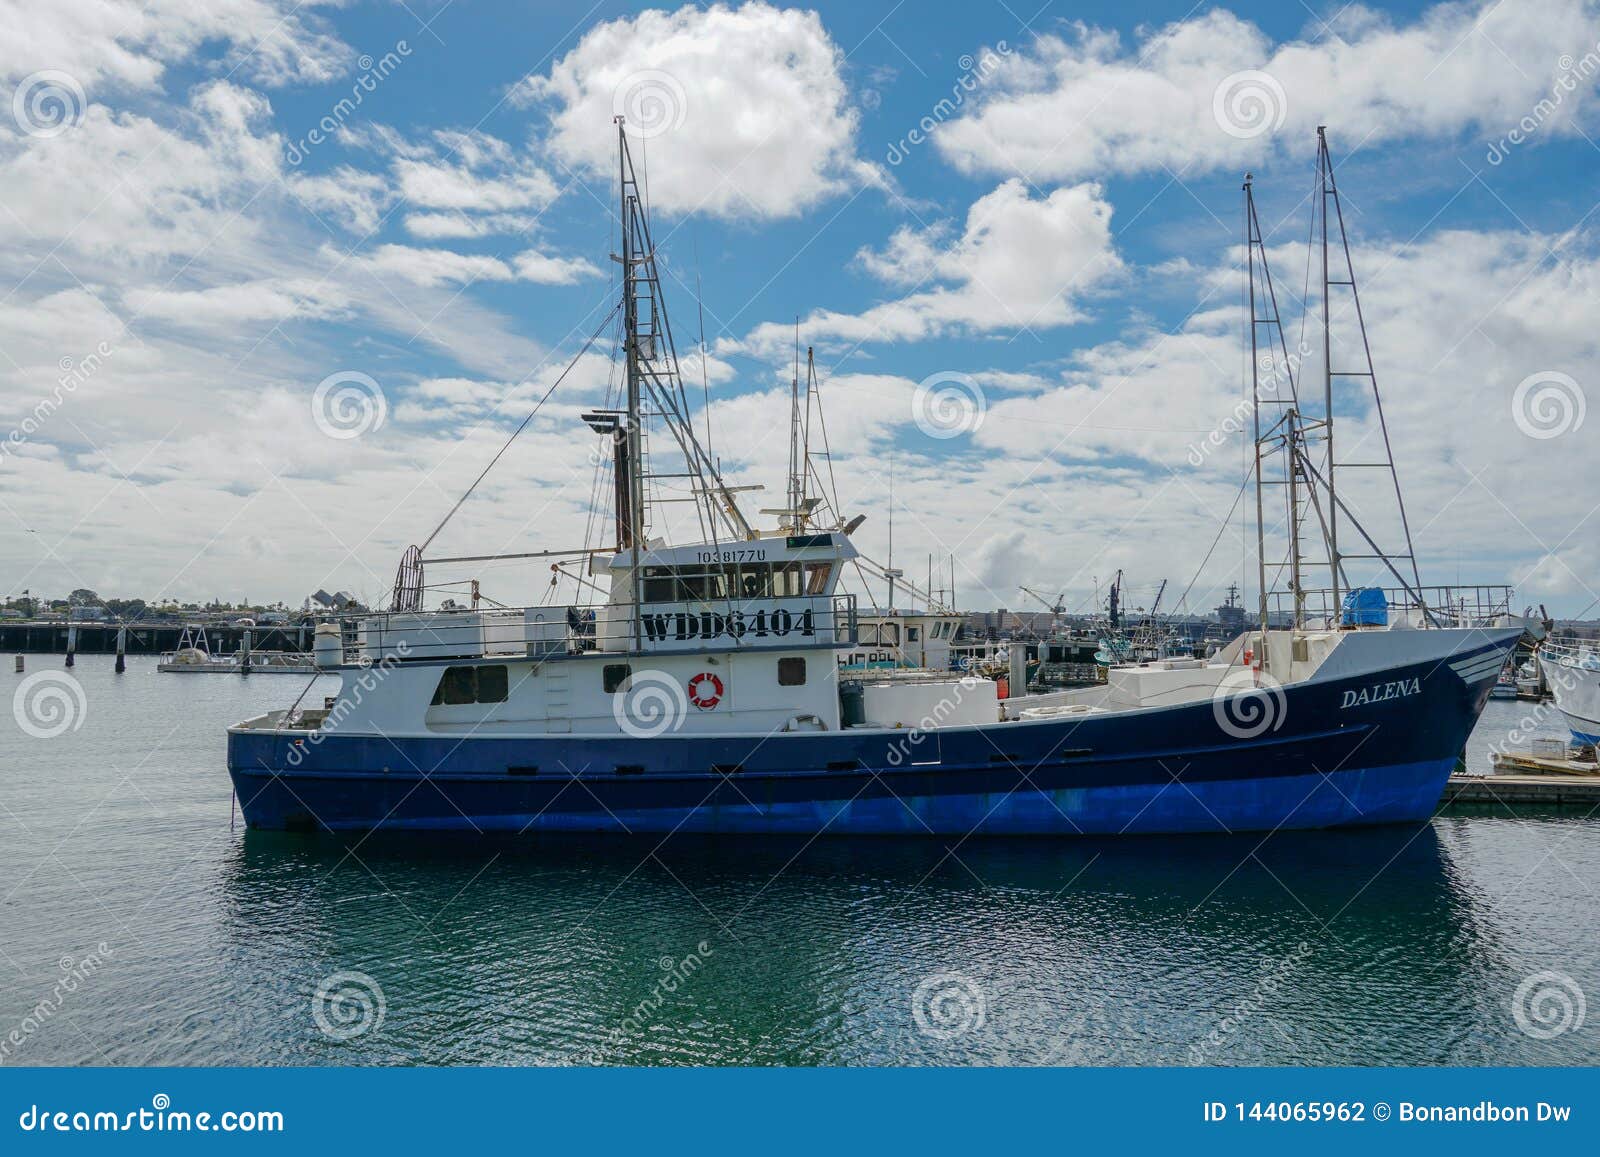 Commercial Fishing Boats Docked in San Diego Harbor. Editorial Photography  - Image of coast, artisanal: 144065962